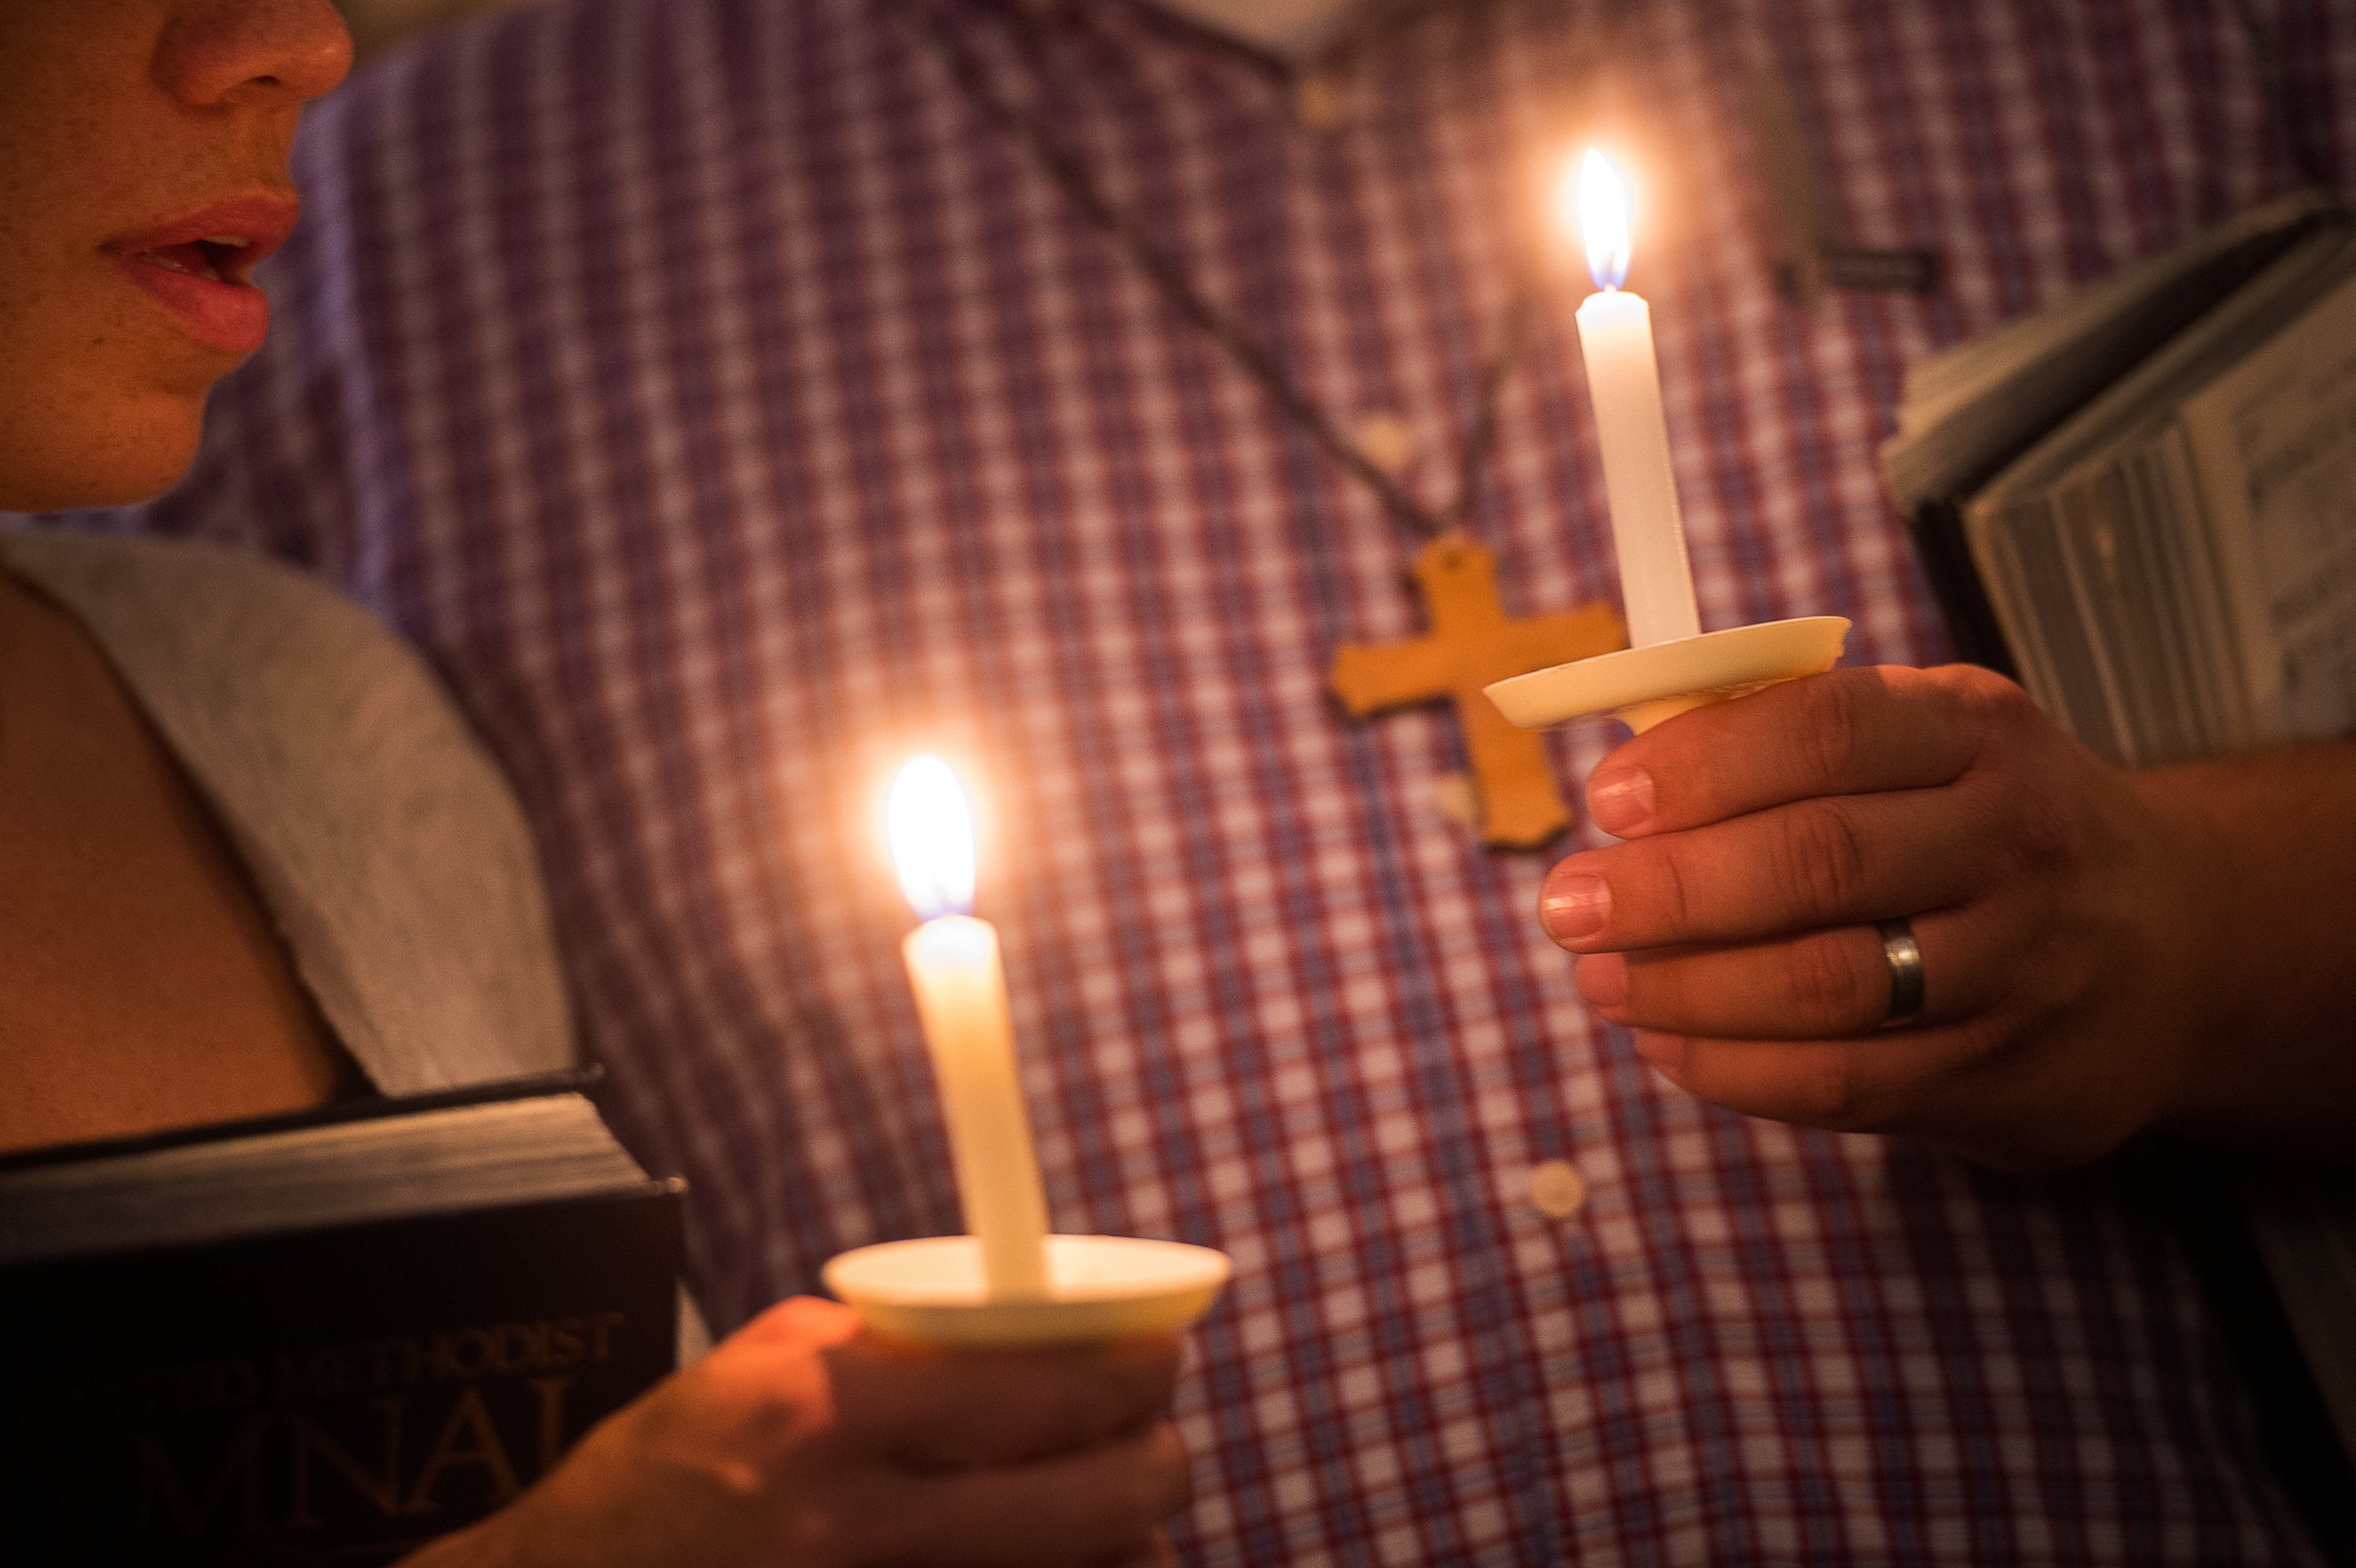 PHOTO: Community supporters light candles in the shape of a heart during a vigil for journalists Alison Parker and Adam Ward who were killed during a shooting in Moneta, Va., Aug. 26, 2015.